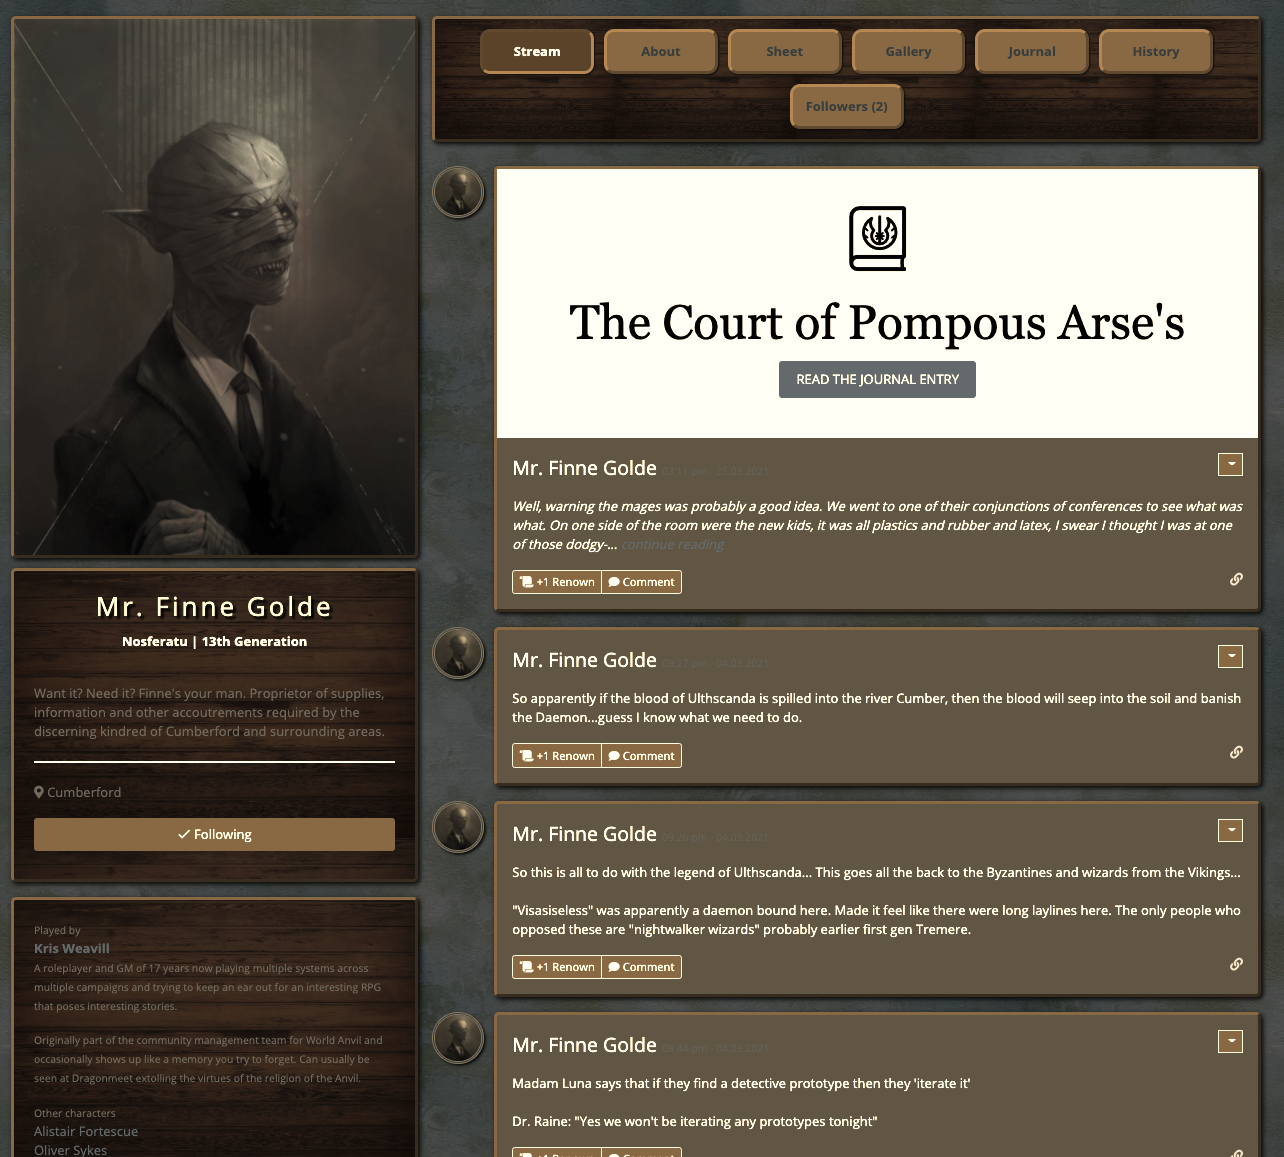 The World Anvil character creator for writers and DnD players contains a social media feed - here you can see quotes and memes as part of the building of character voice, developing a standard character template into a fully fleshed out character for a novel or game!